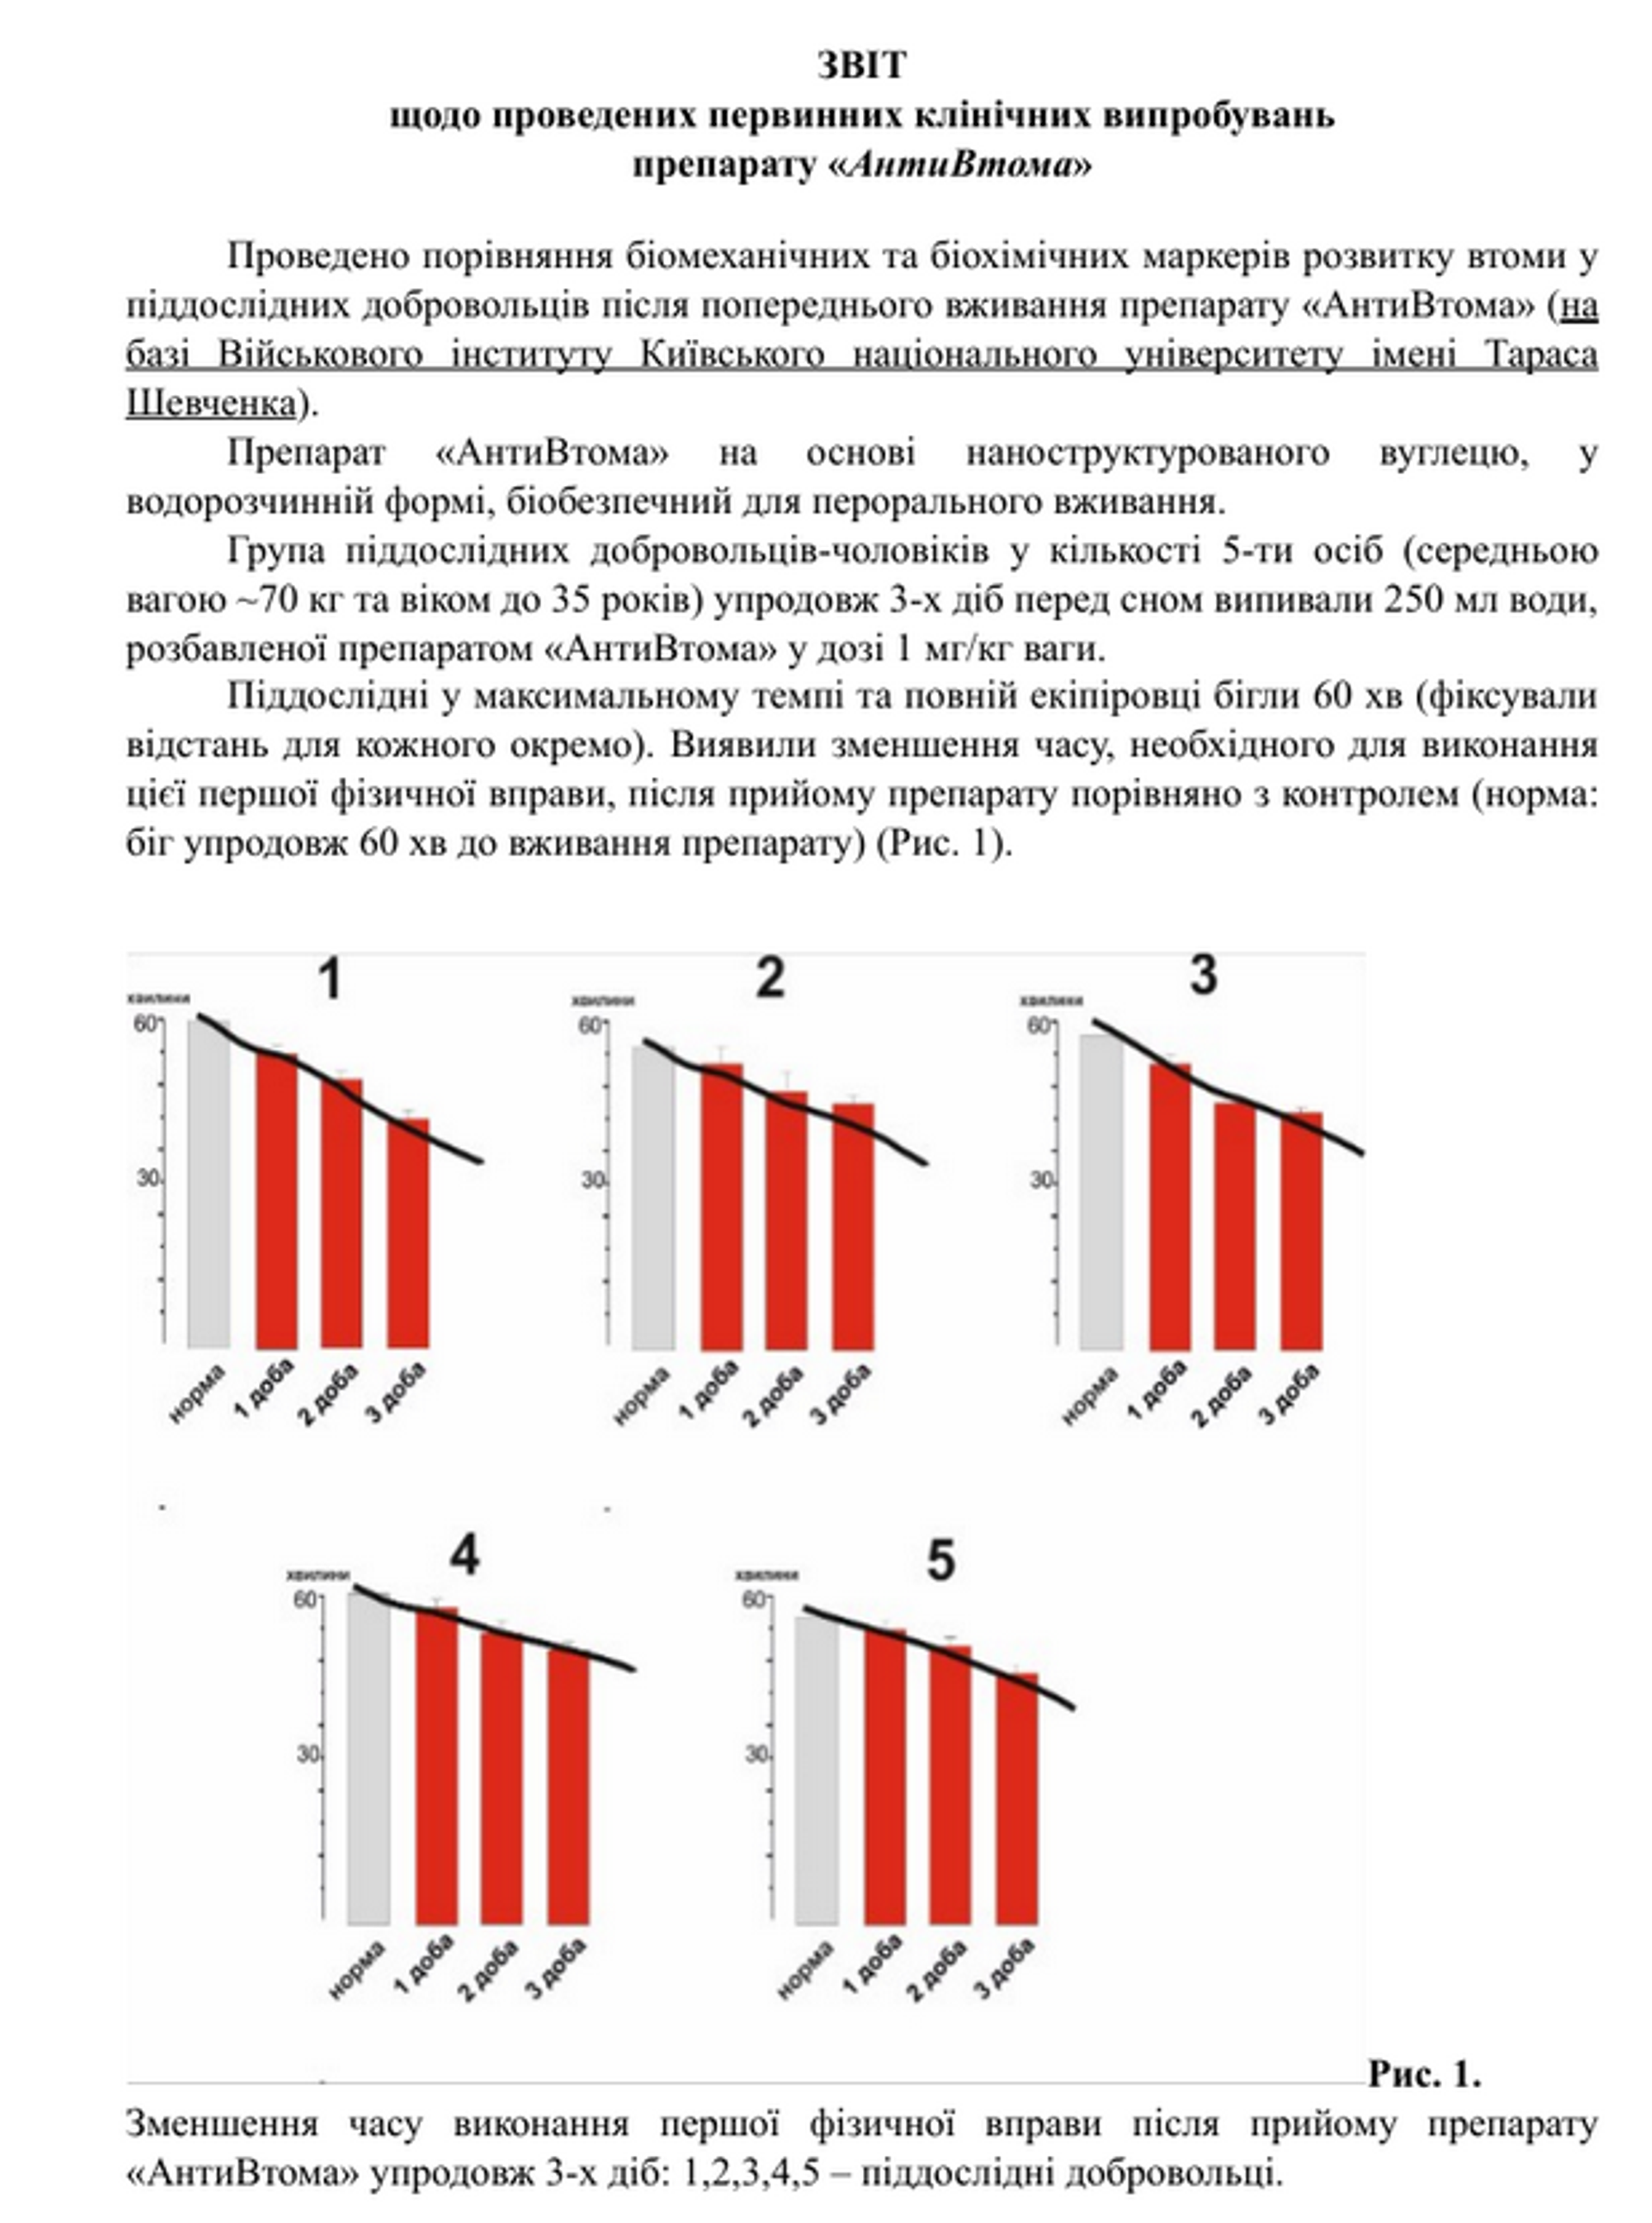 Excerpt from a document on Ukrainian military research into an anti-fatigue drug. One of several similar documents presented by RCB Troops Chief Igor Kirillov at Monday's presentation. - Sputnik International, 1920, 30.01.2023